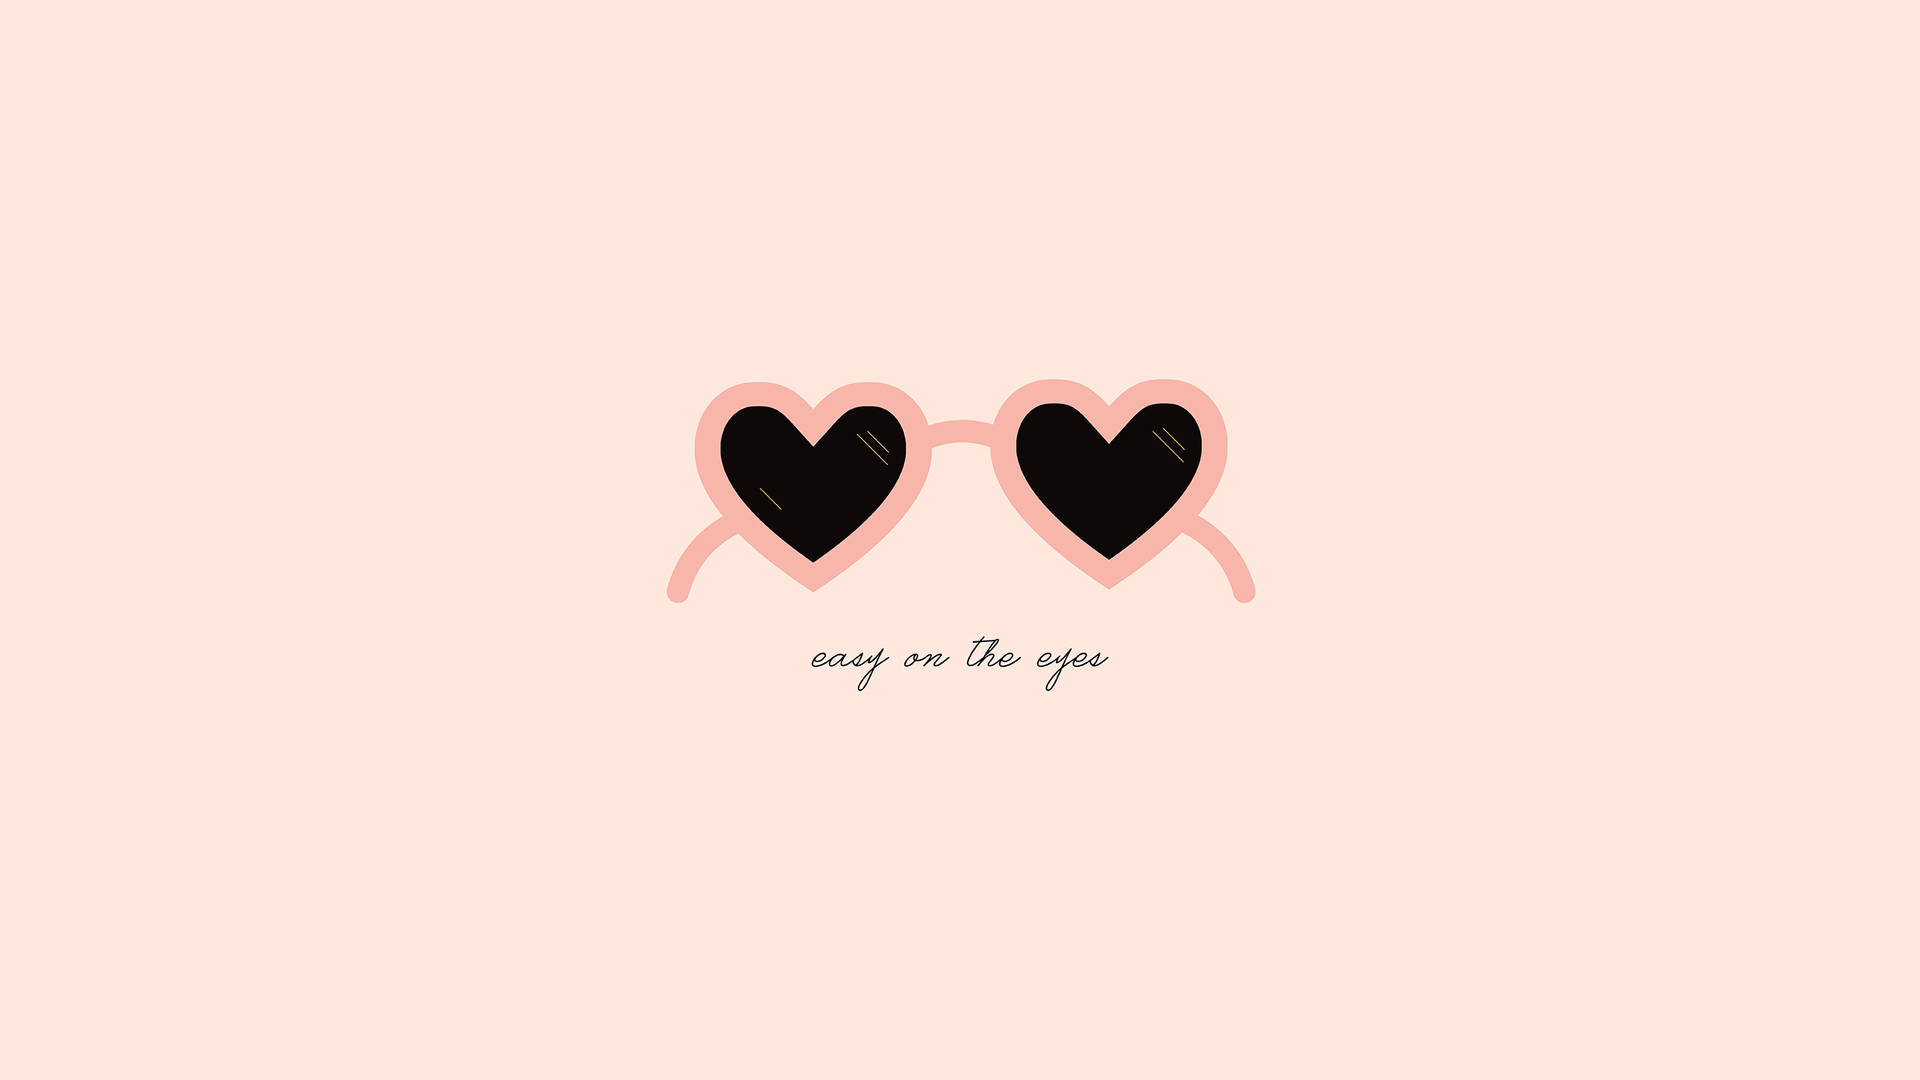 Stay funky this February with eye-catching pink heart-shaped sunglasses! Wallpaper